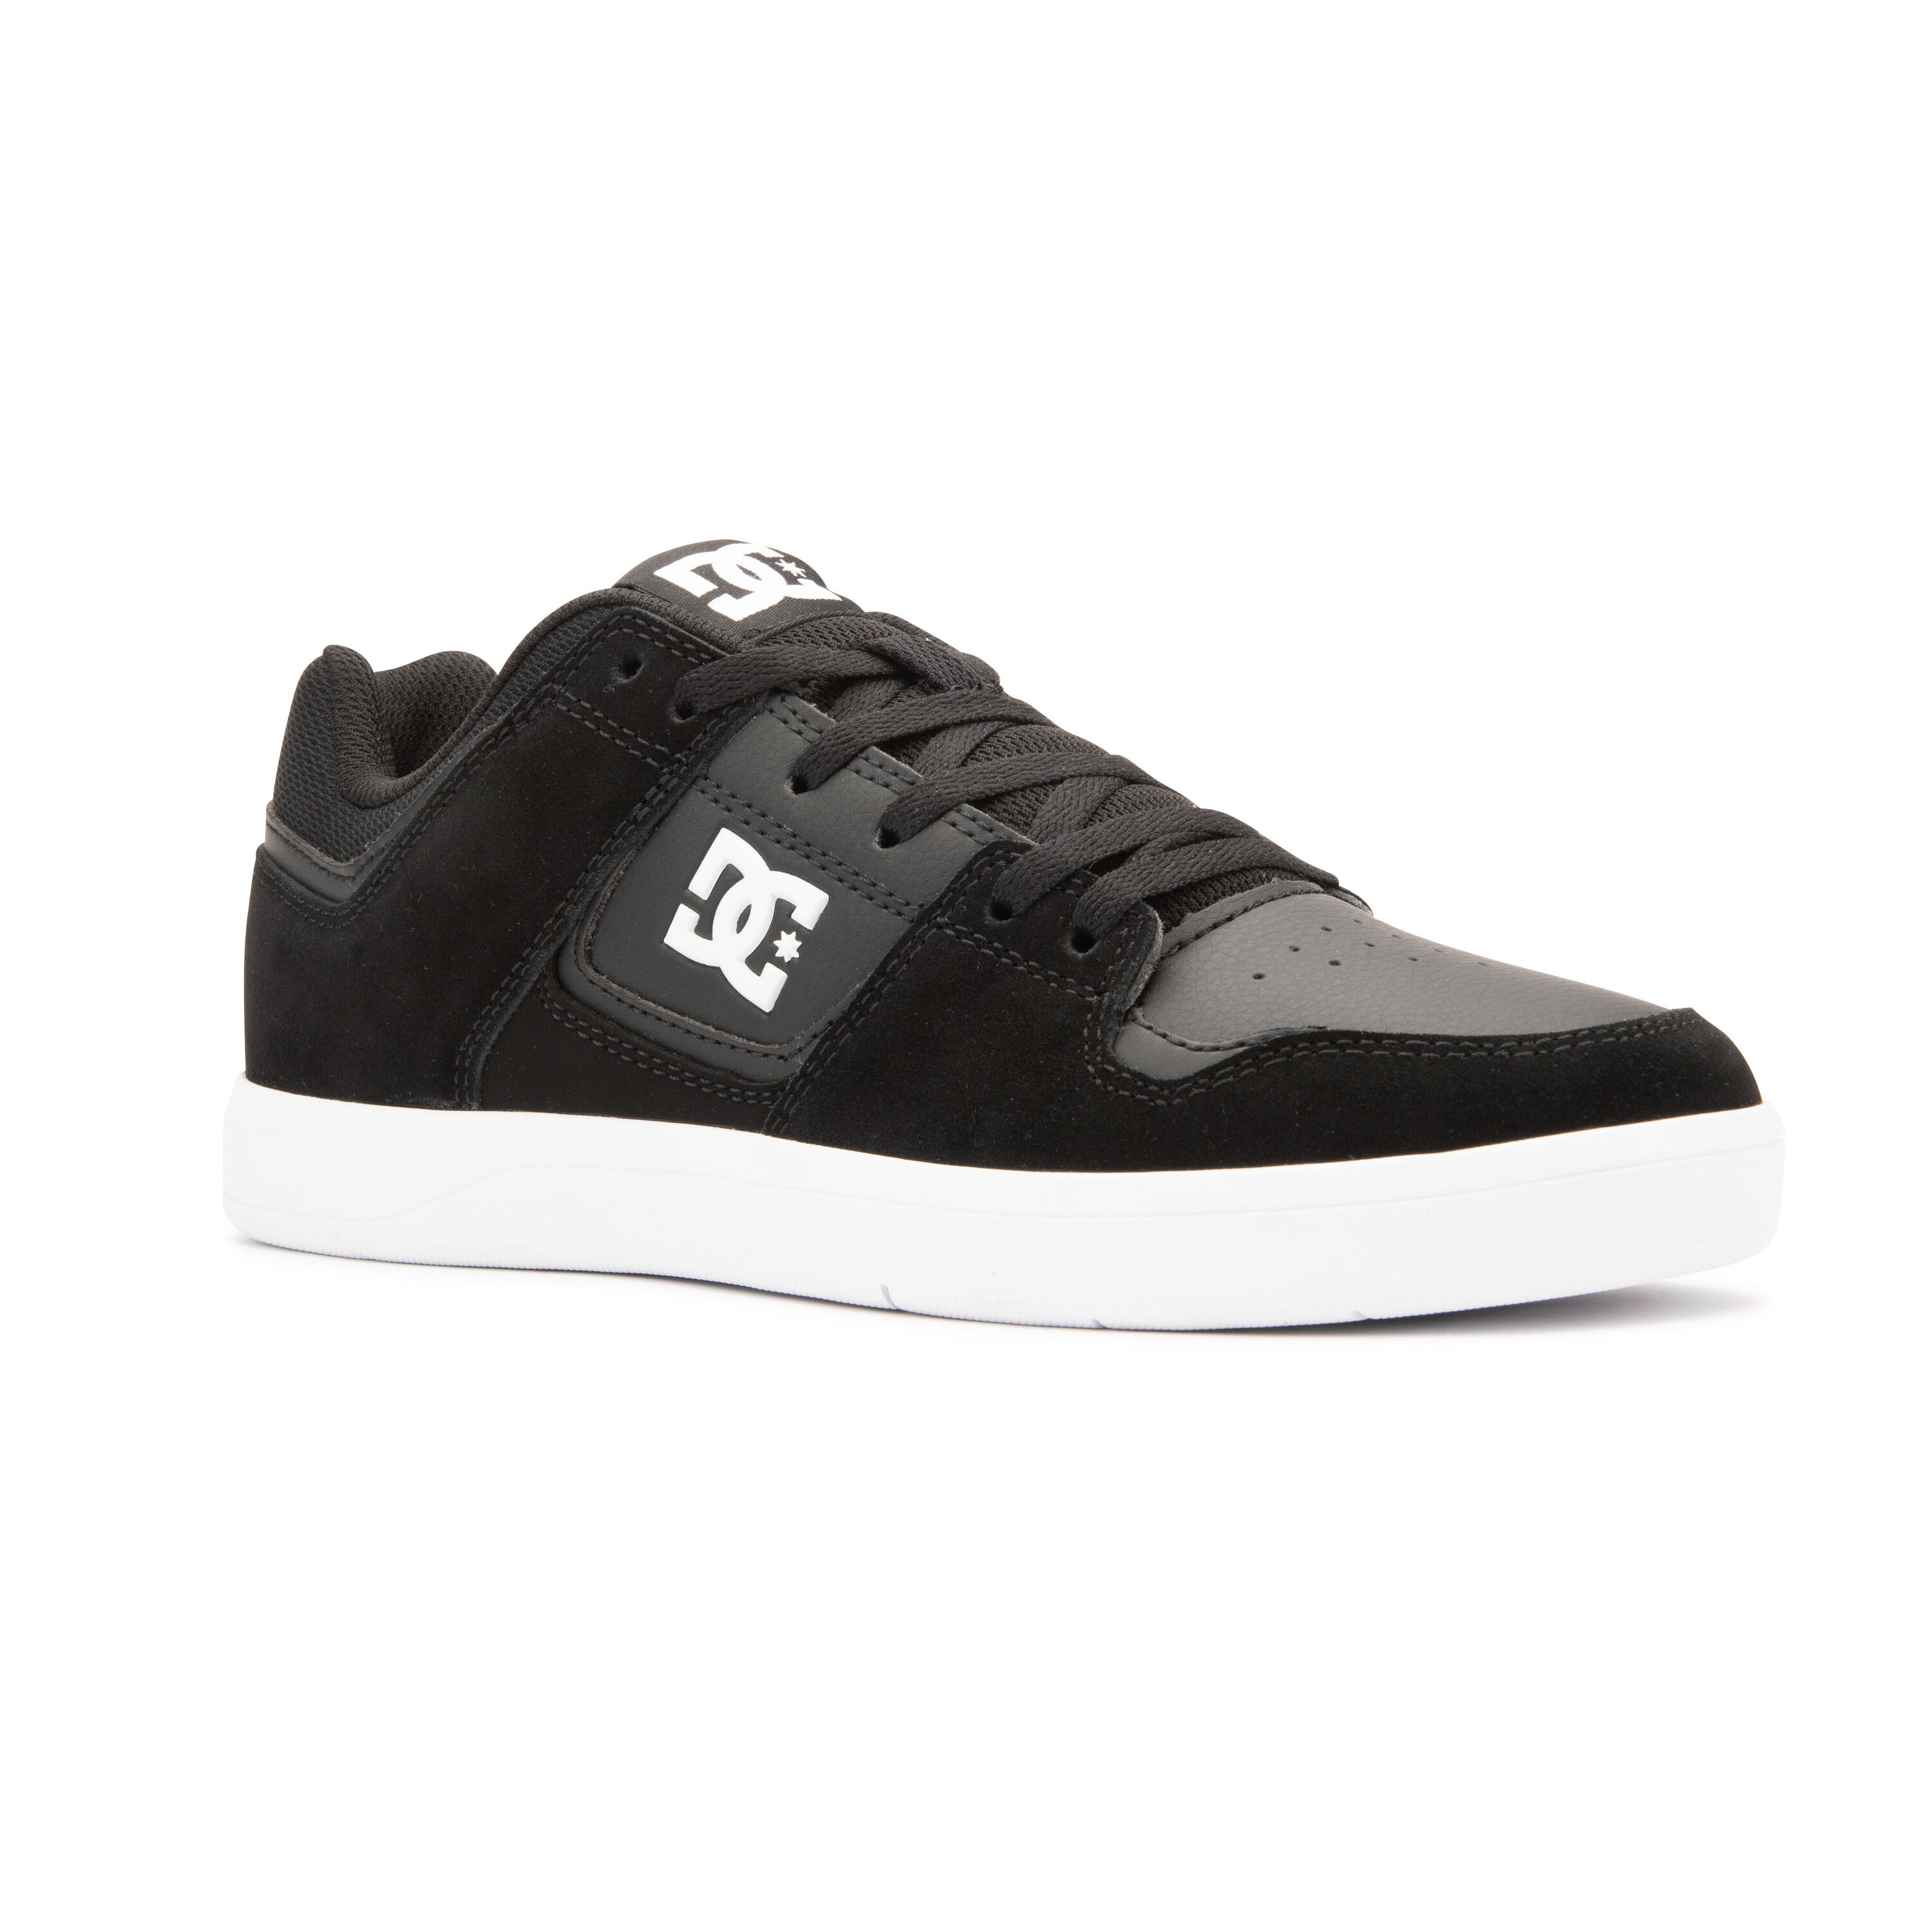 Adult Skate Shoes Cure - Black/White 1/11